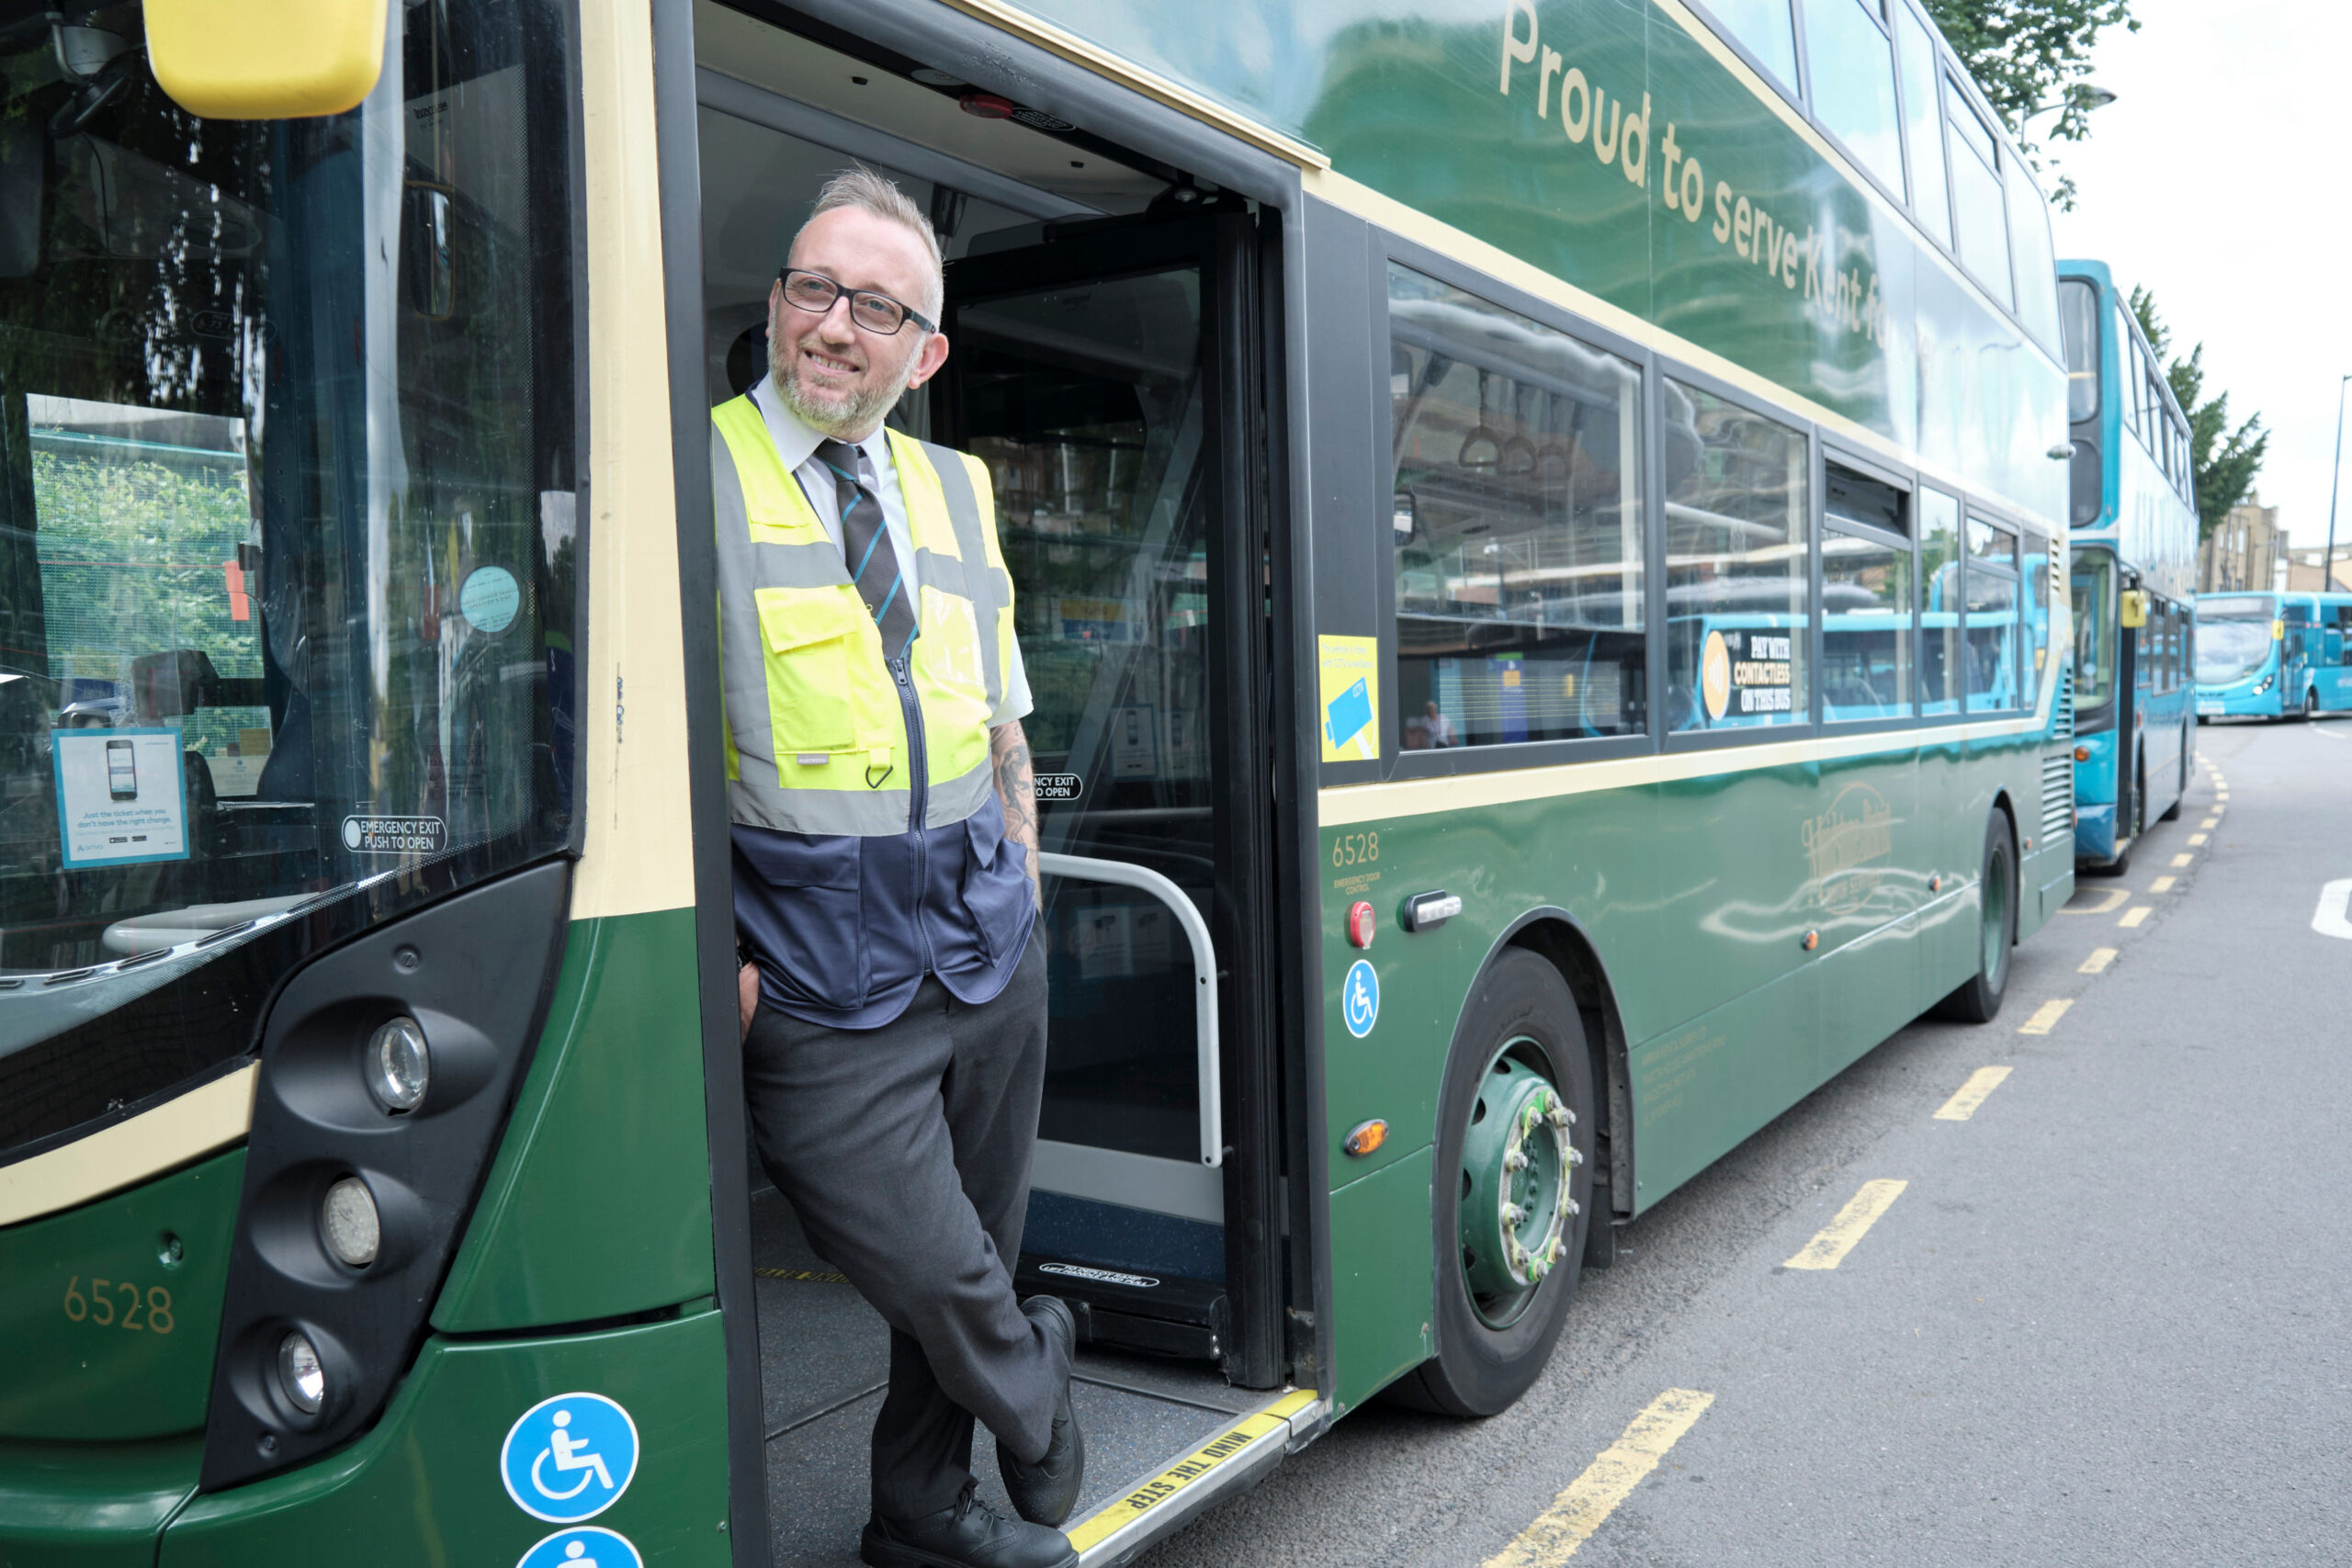 Arriva bus and worker